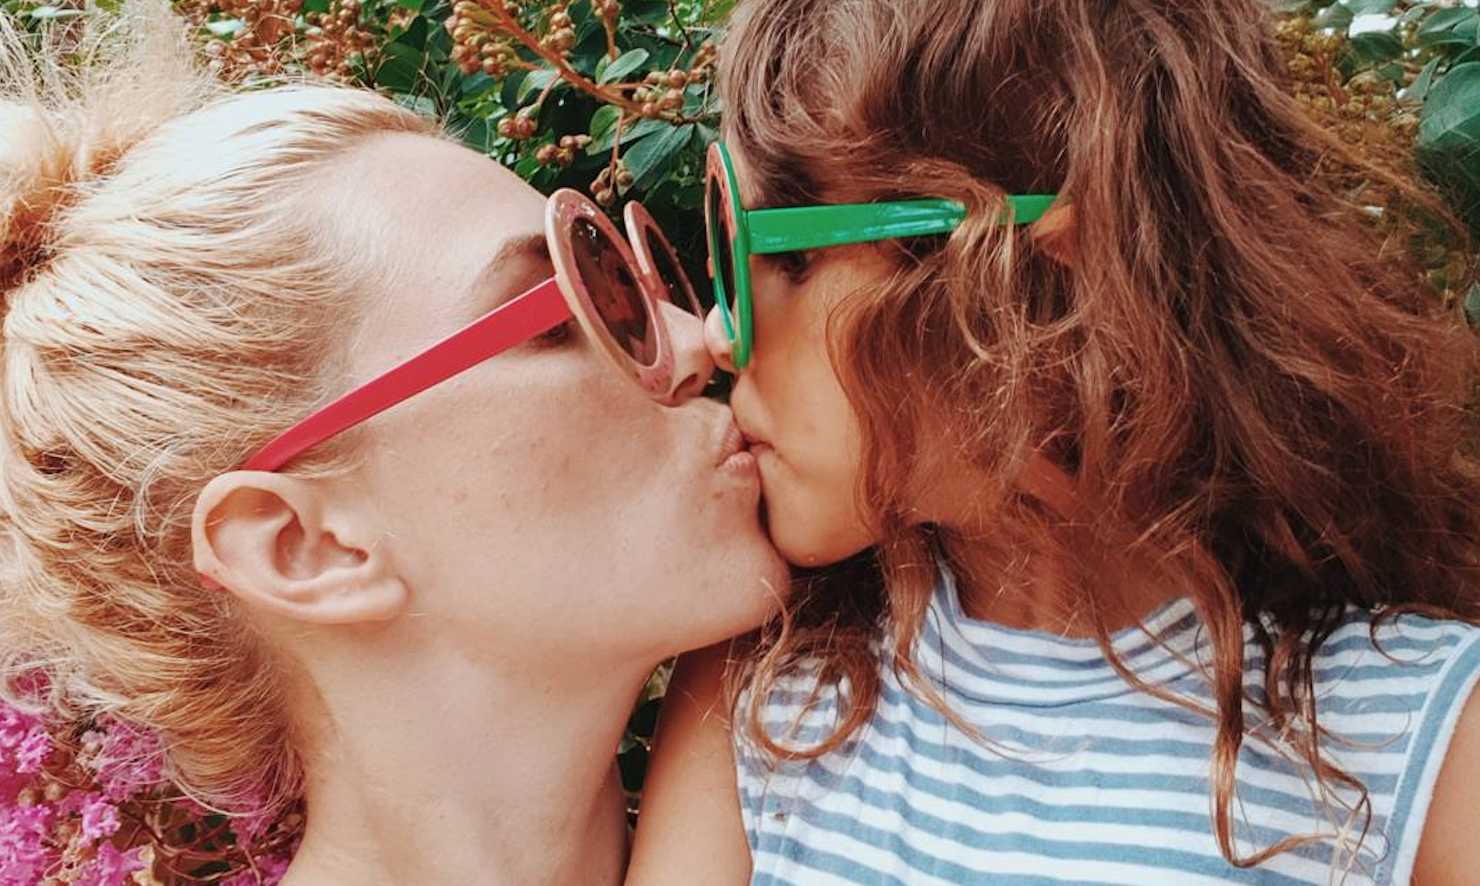 This Mom Will Damn Well Kiss Her Kid on the Lips Whenever She Wants To.